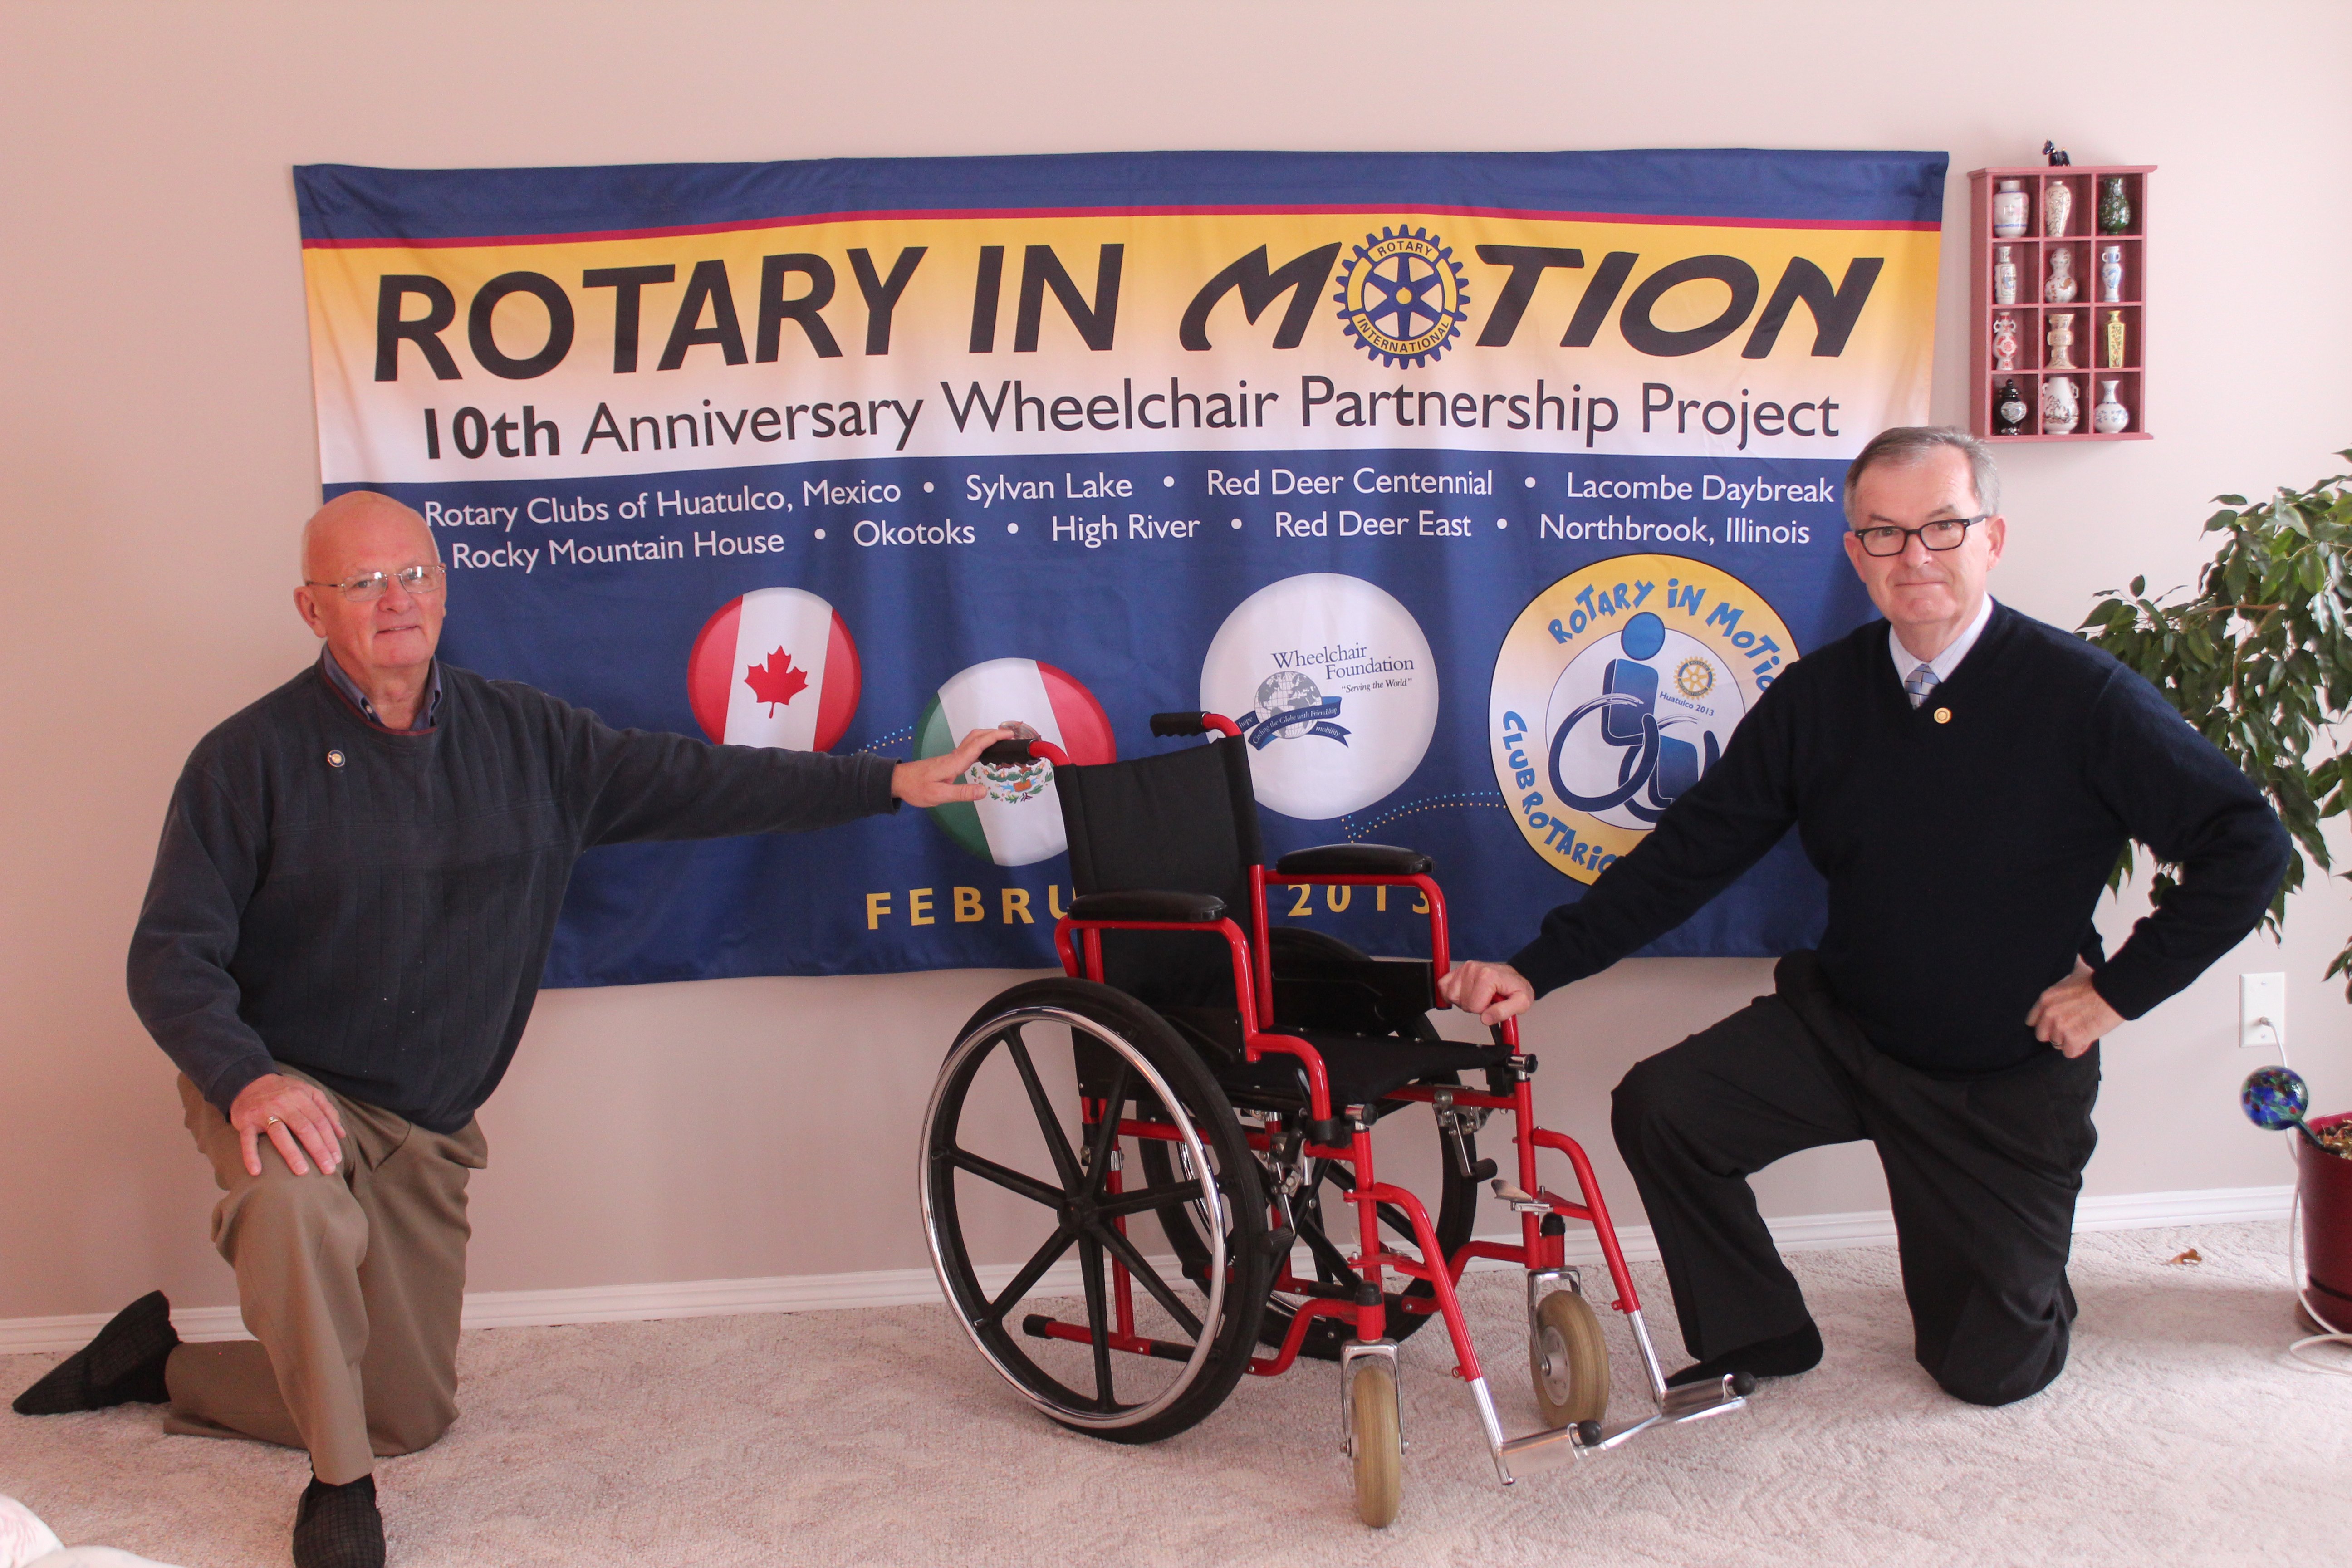 LENDING SUPPORT – Rotary Club members (from left) Neil Swensrude and Garnet Ward